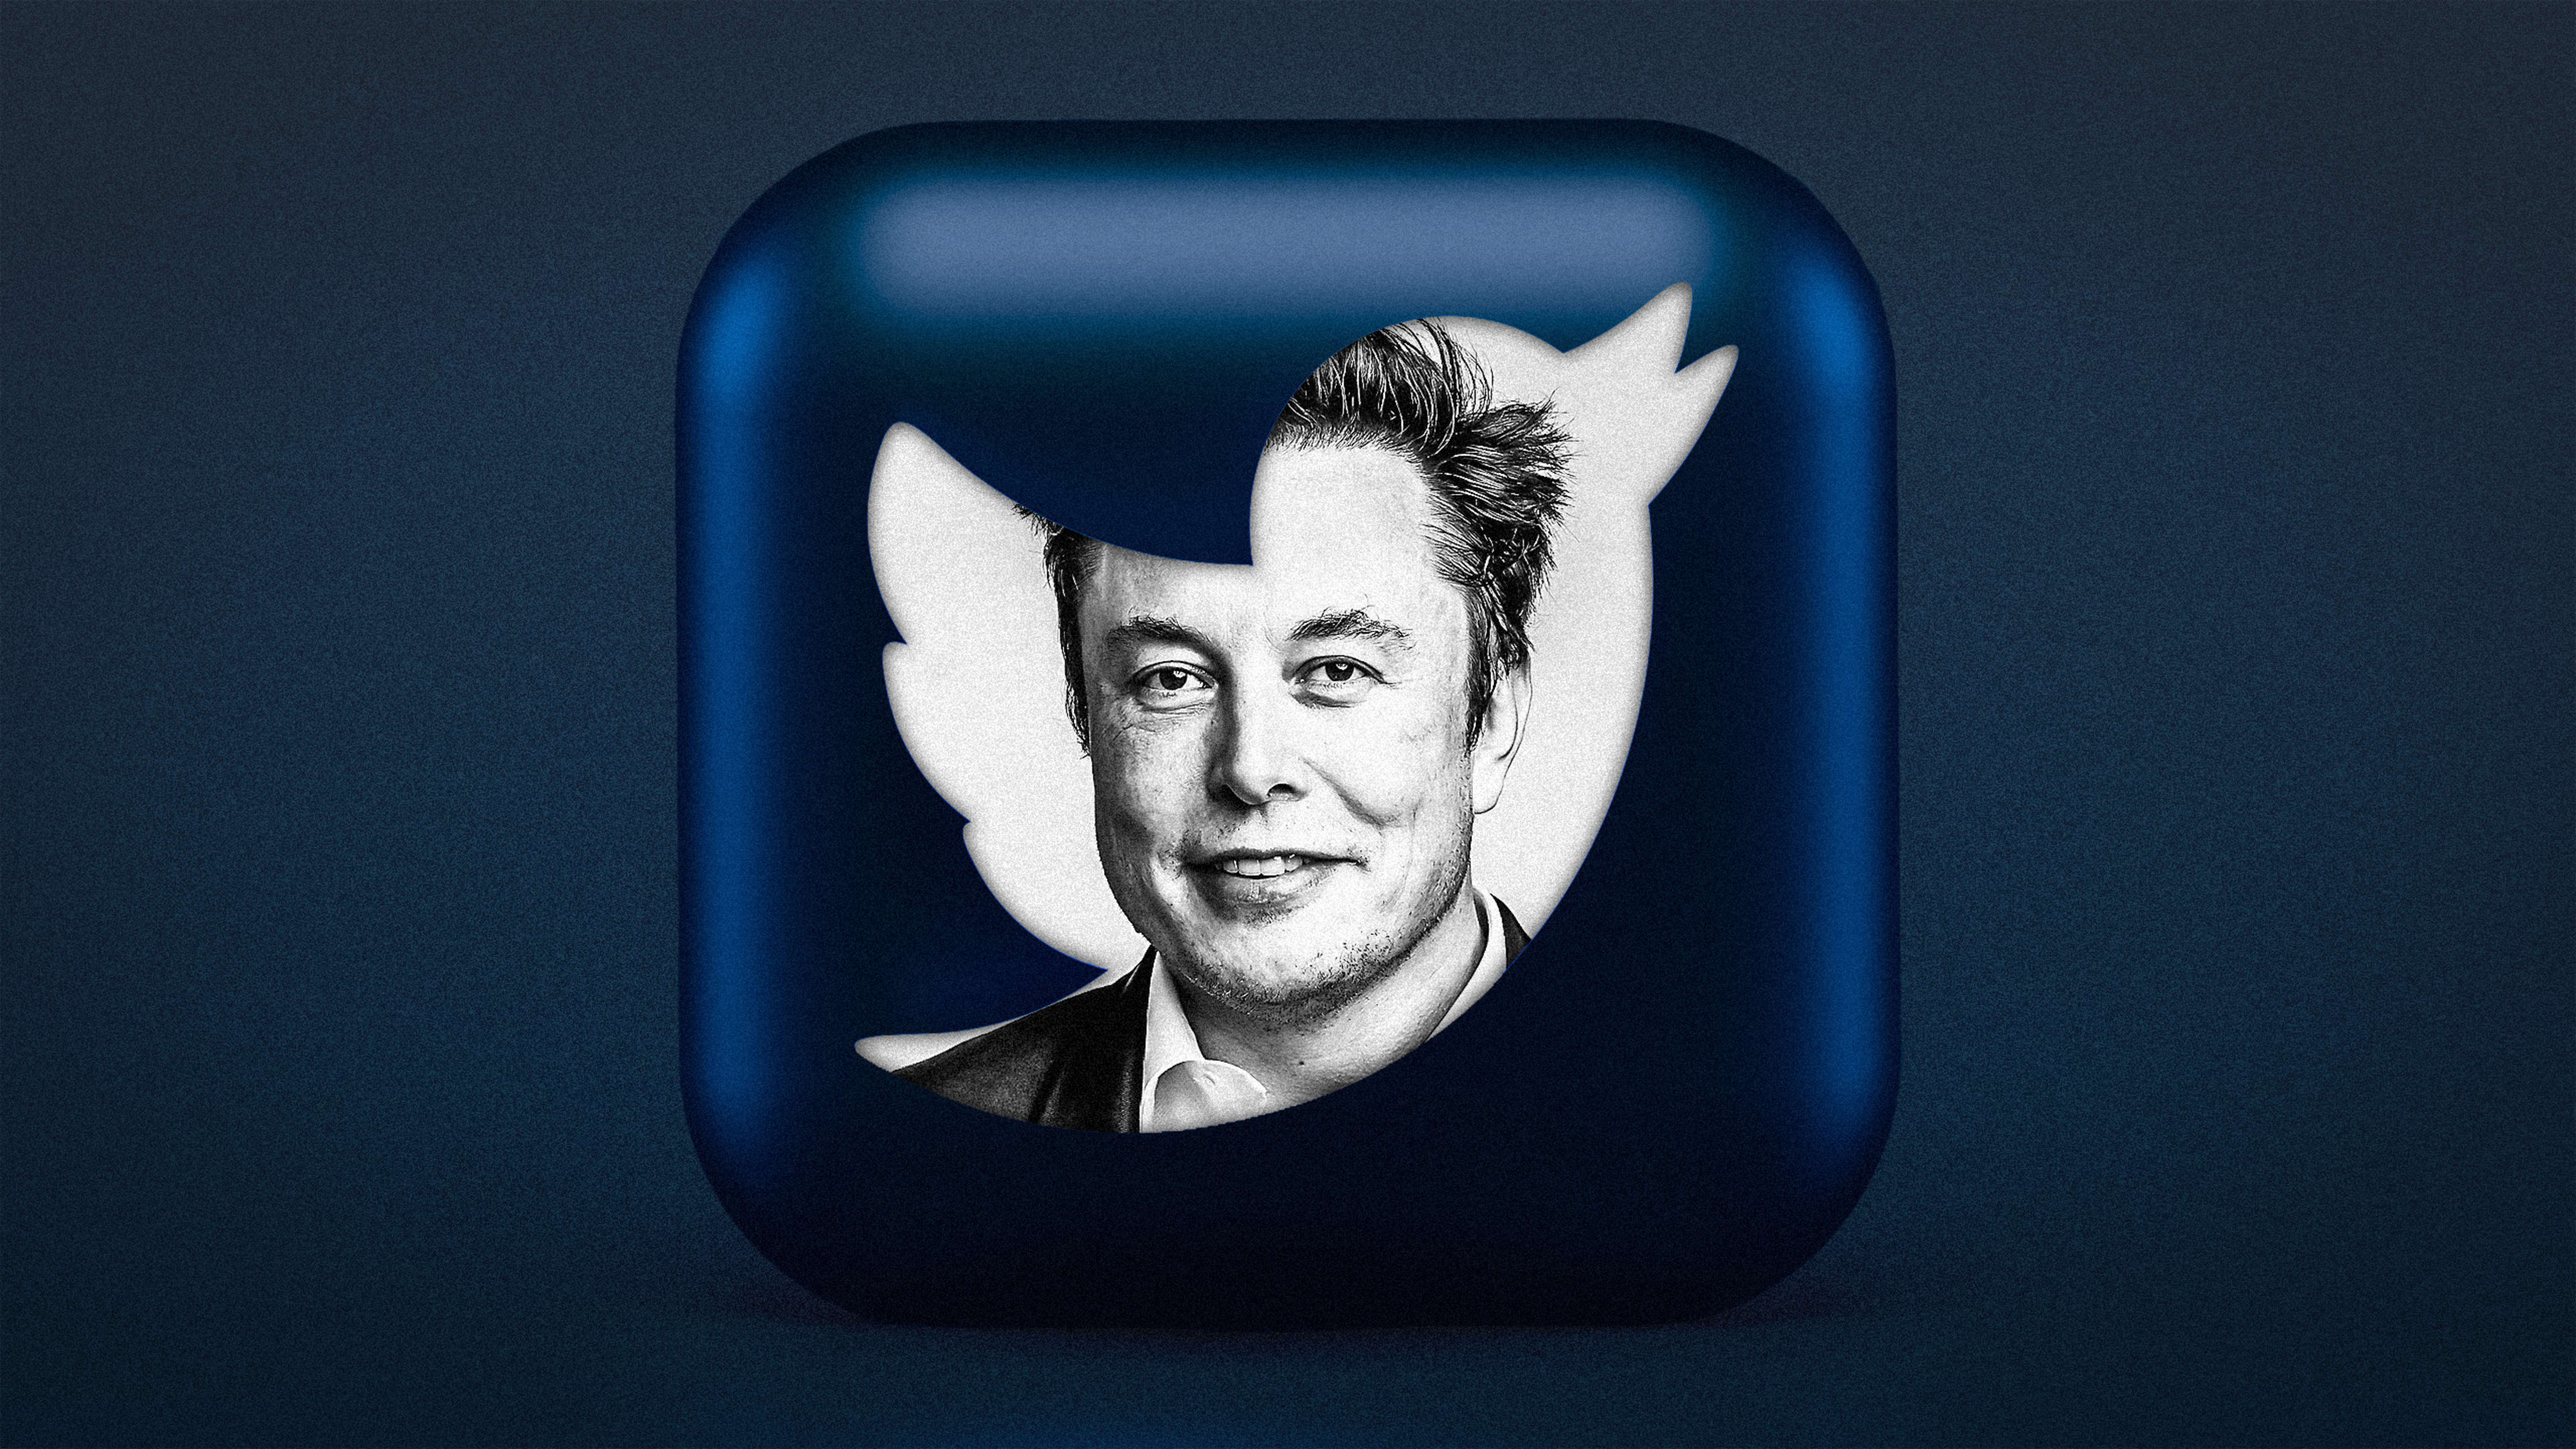 What to expect from Twitter now that Elon Musk is officially in charge